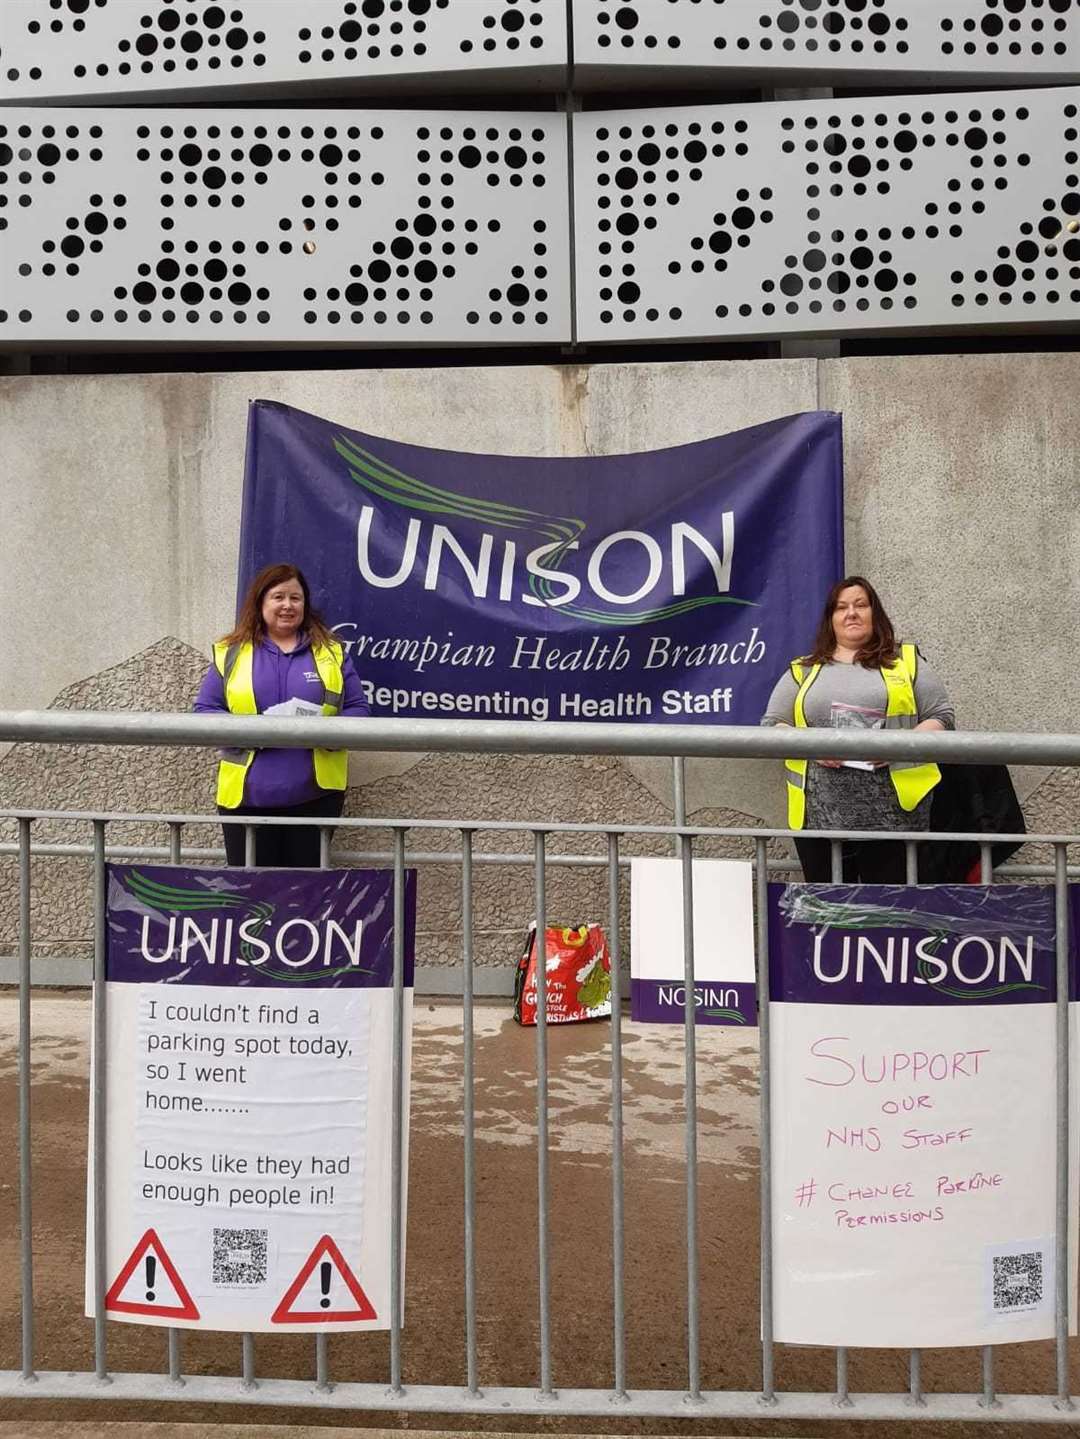 Unison members say a resolution is needed at ARI